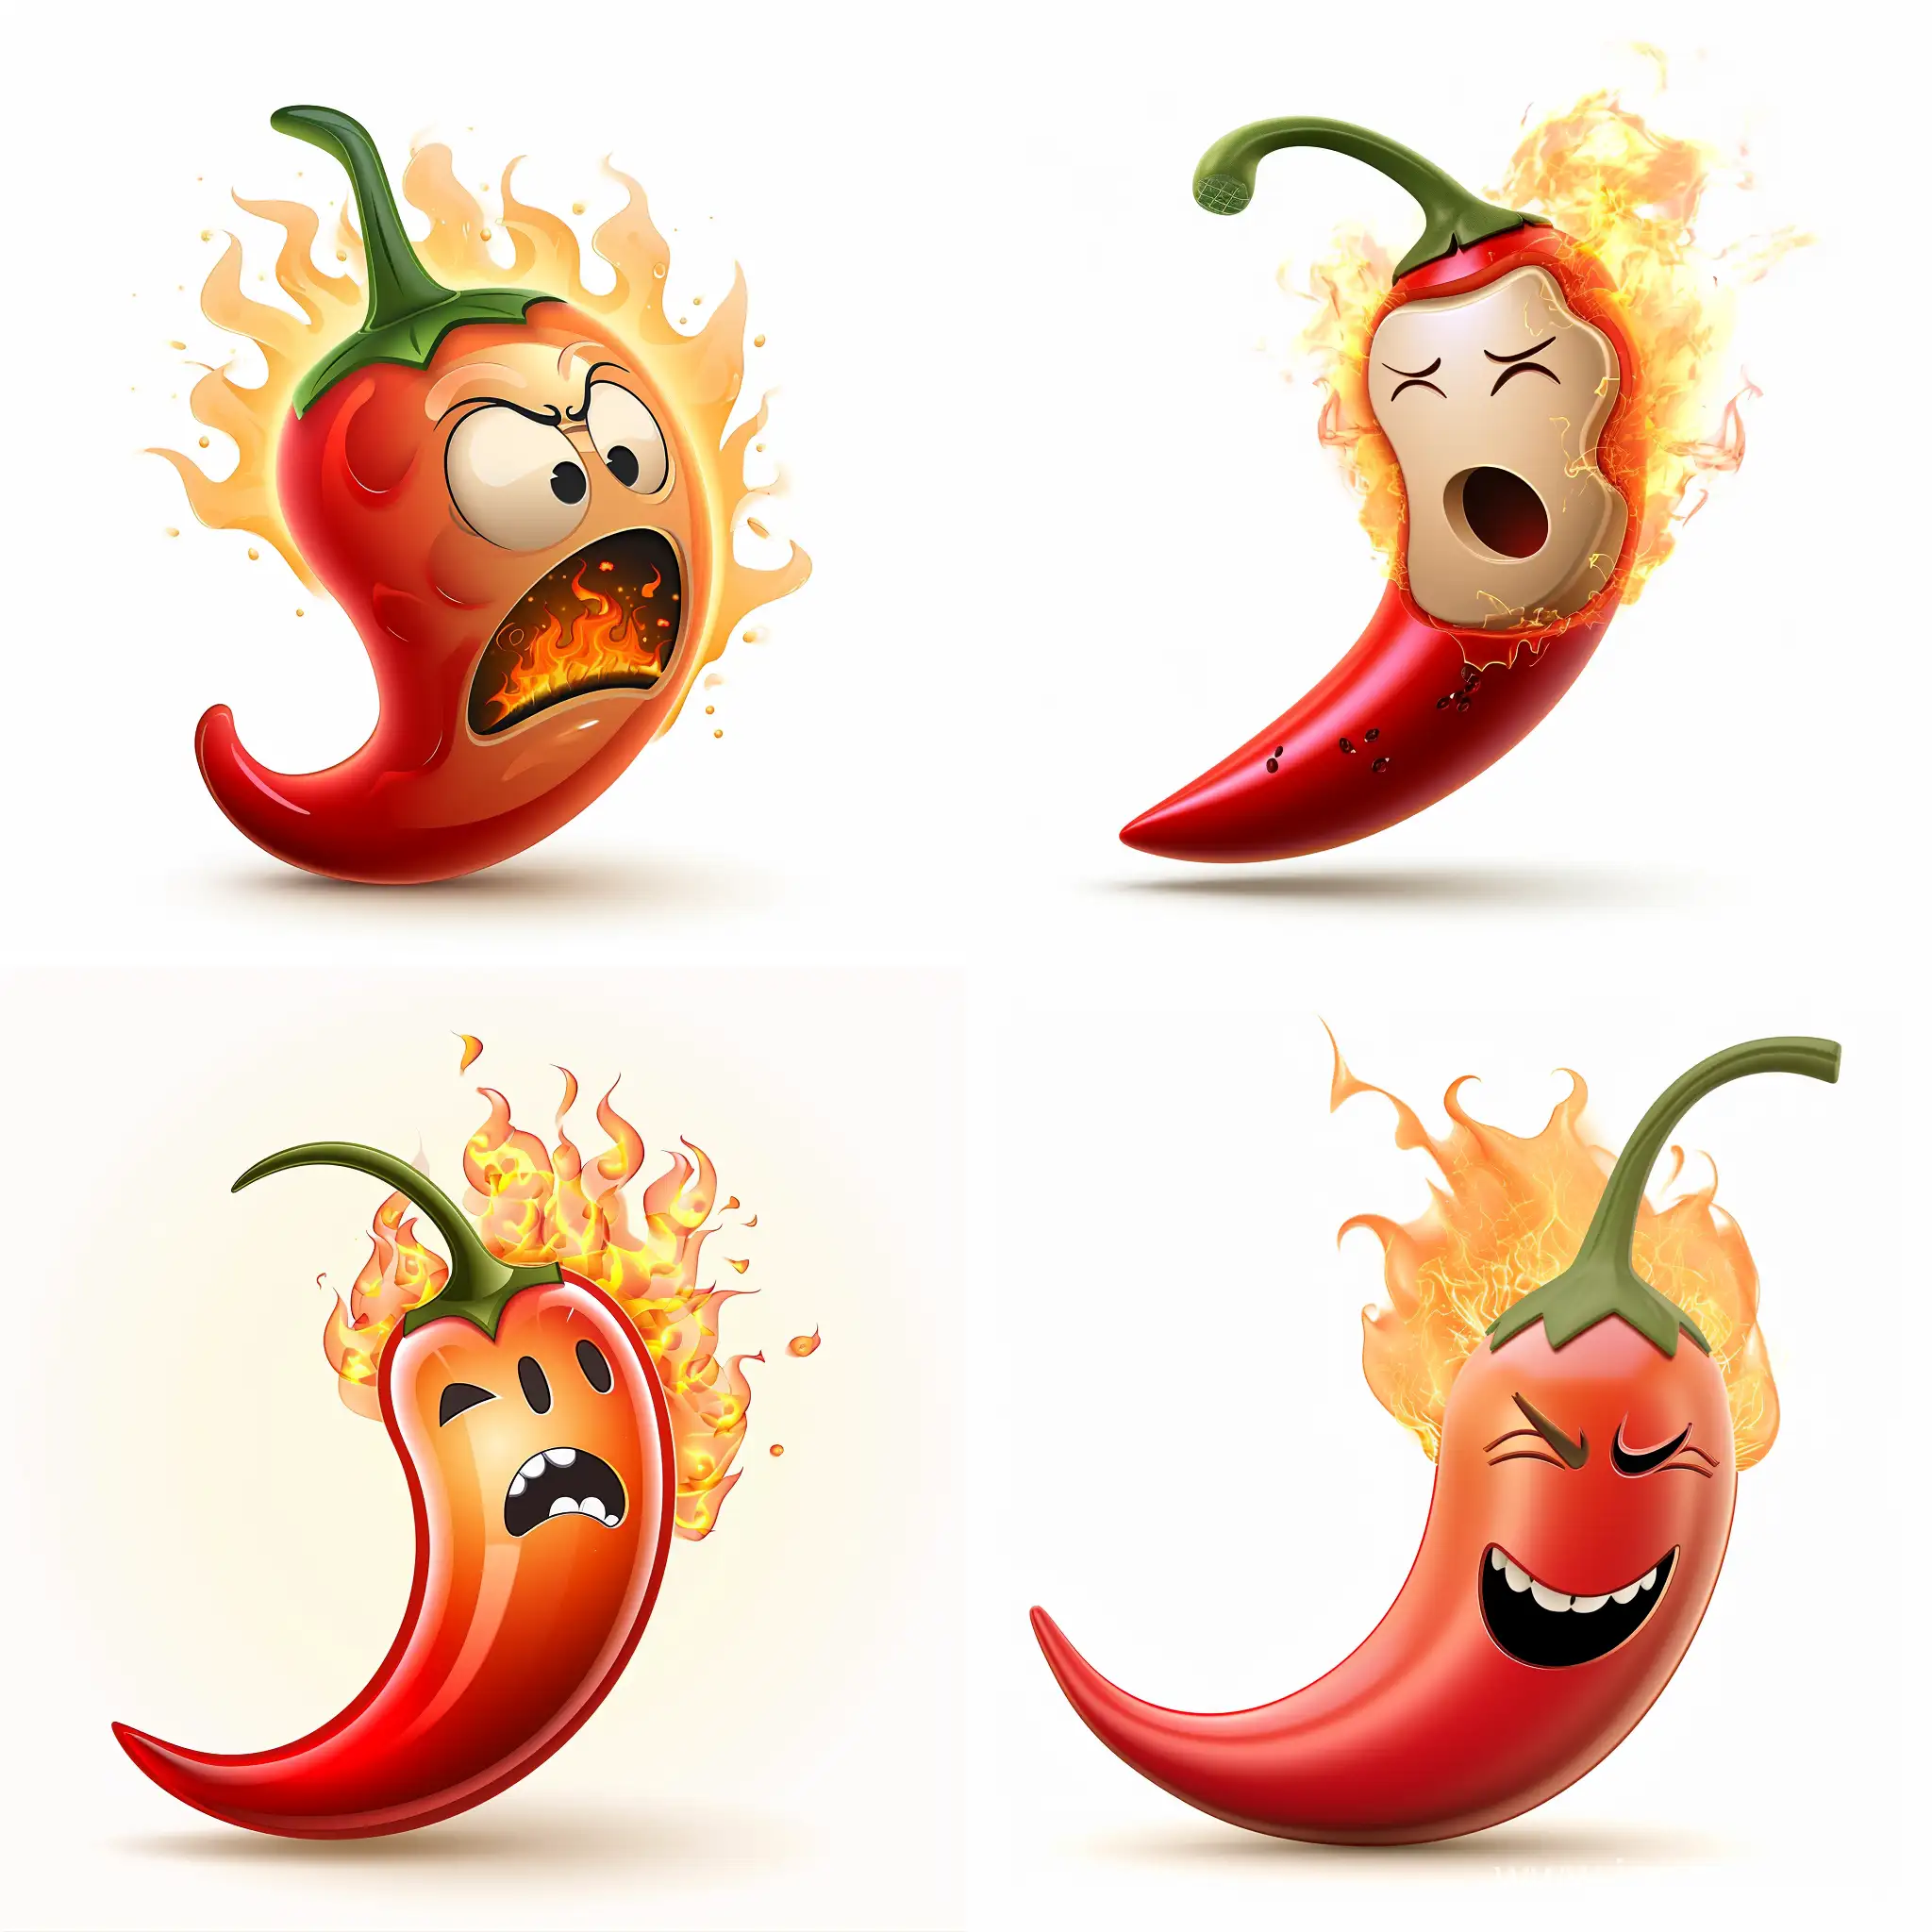 chili pepper emoji with hot face in fire on white background